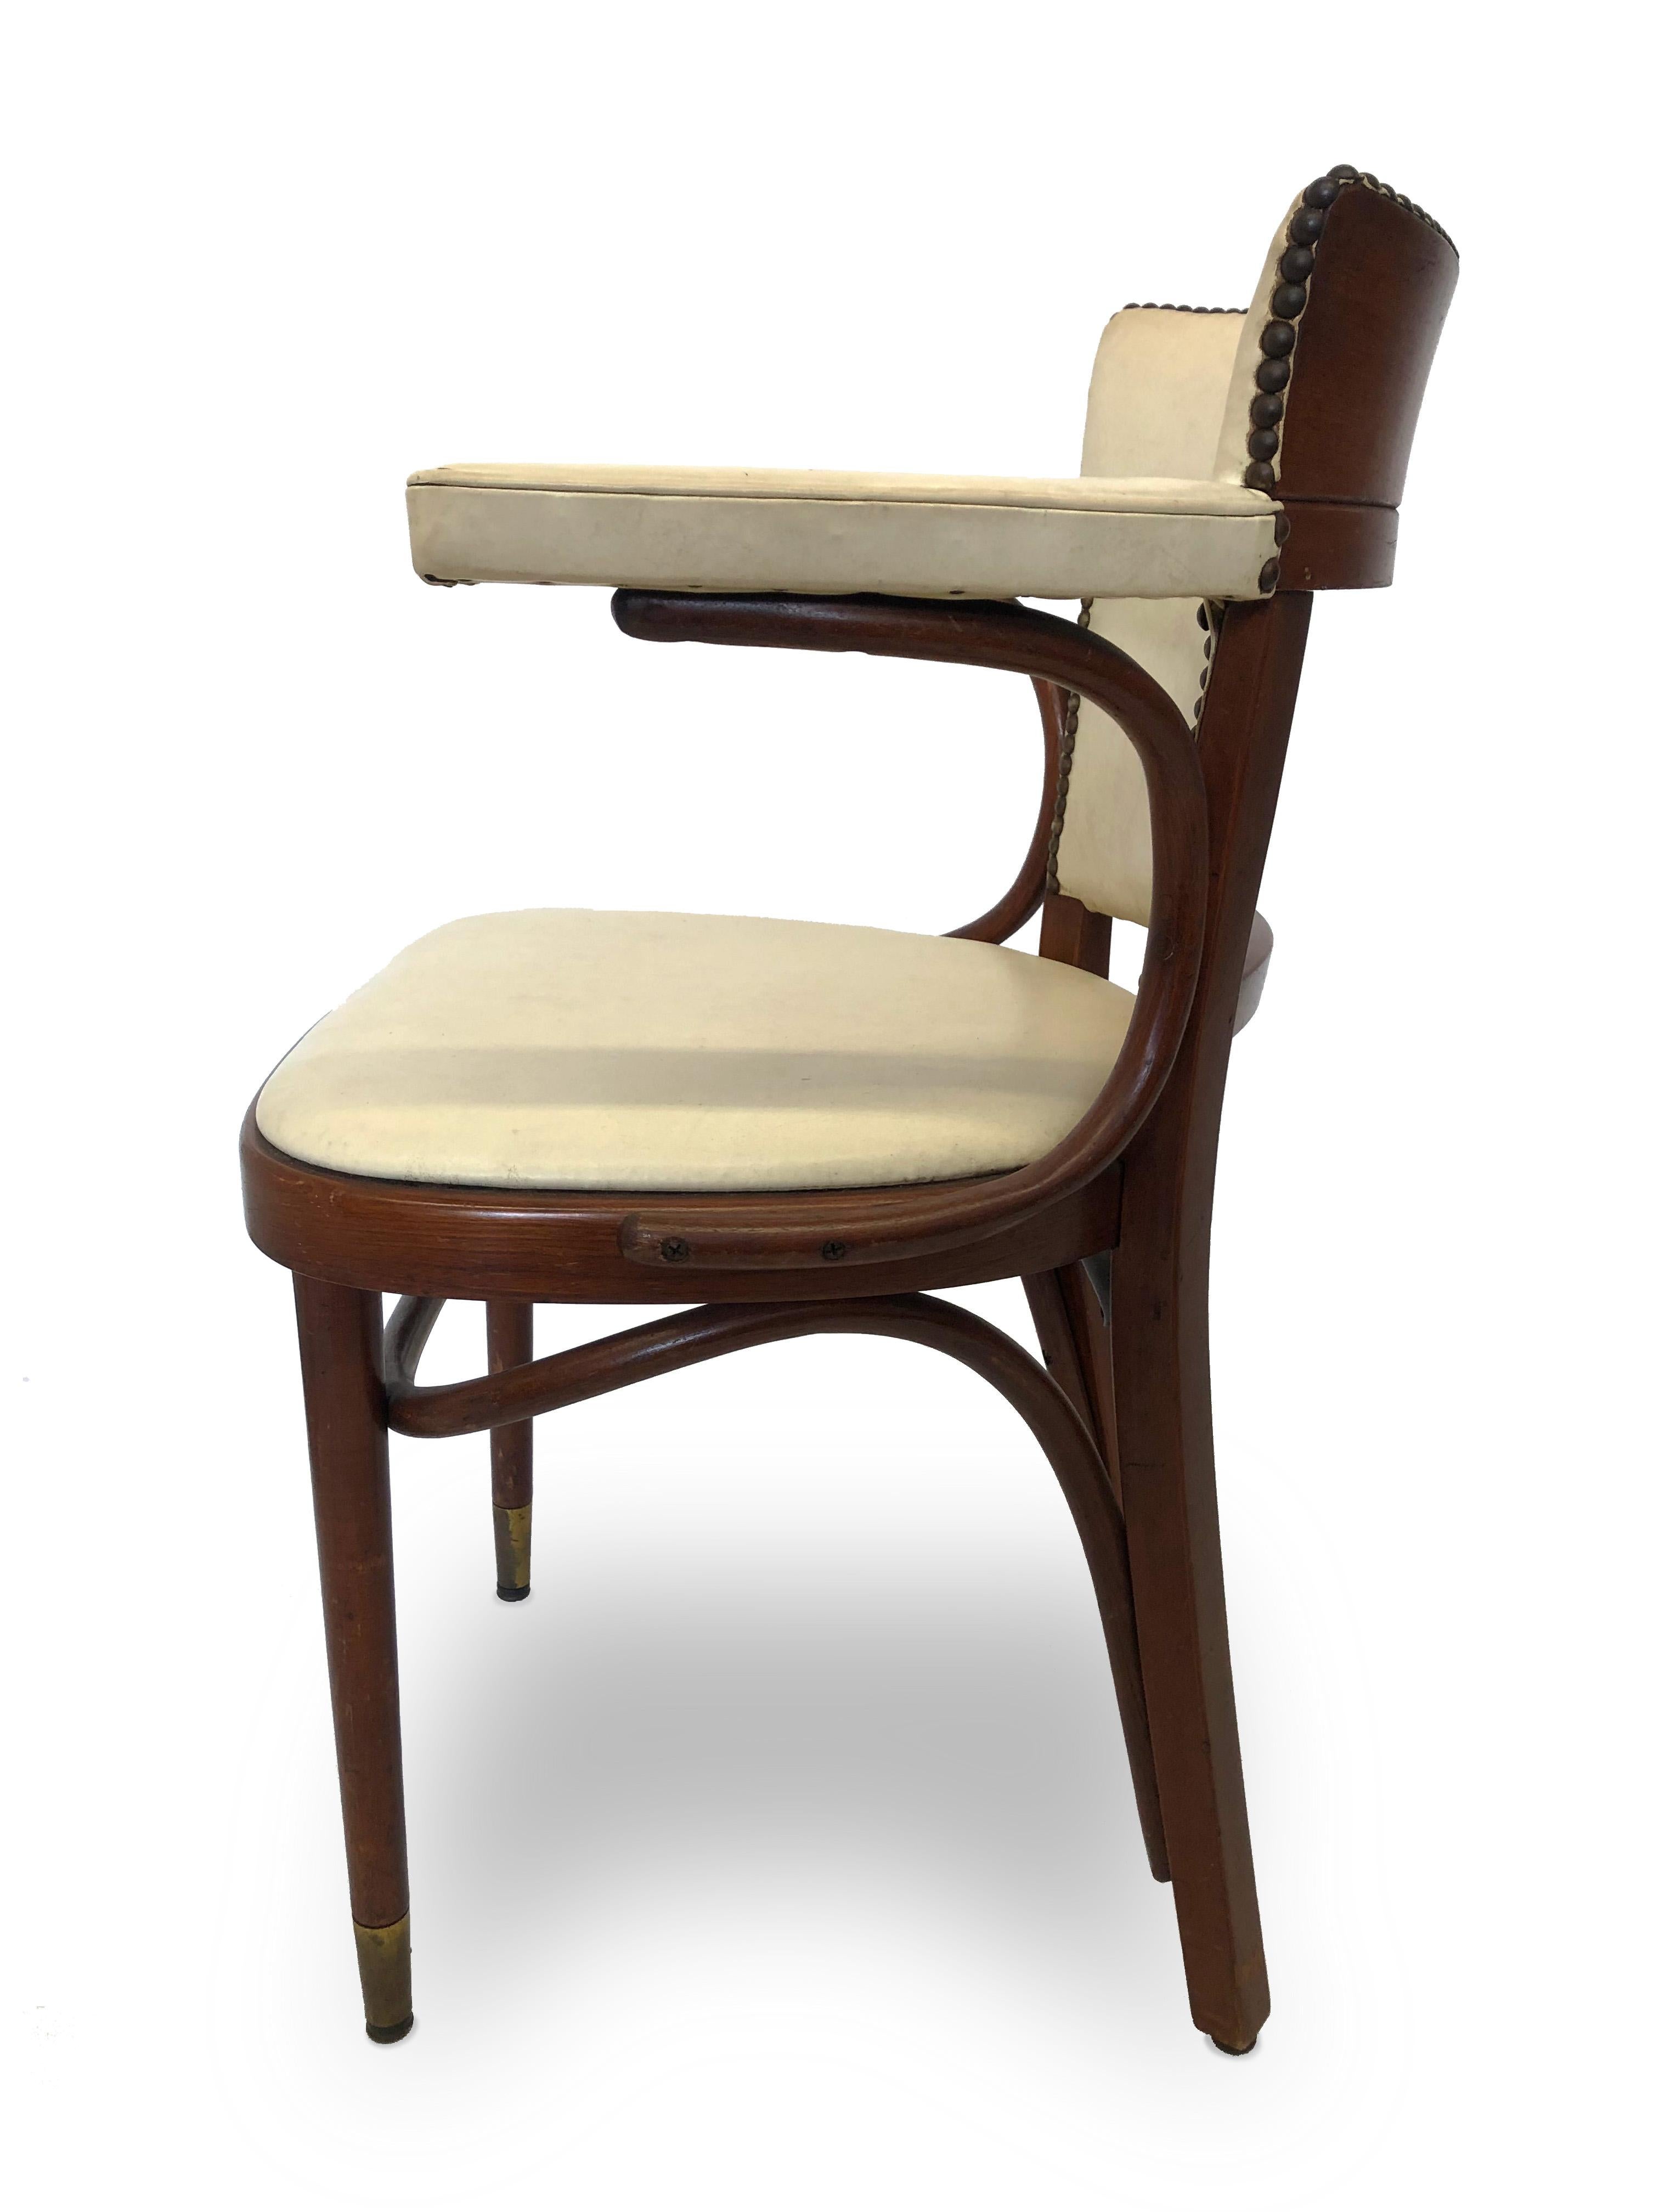 This wooden chair is exquisitely adorned with nail heads through out the squared back of the chair. The chair has a curved support that elegantly holds the arm rest, along with its straight wooden legs and beautiful white leather seat. 

Property